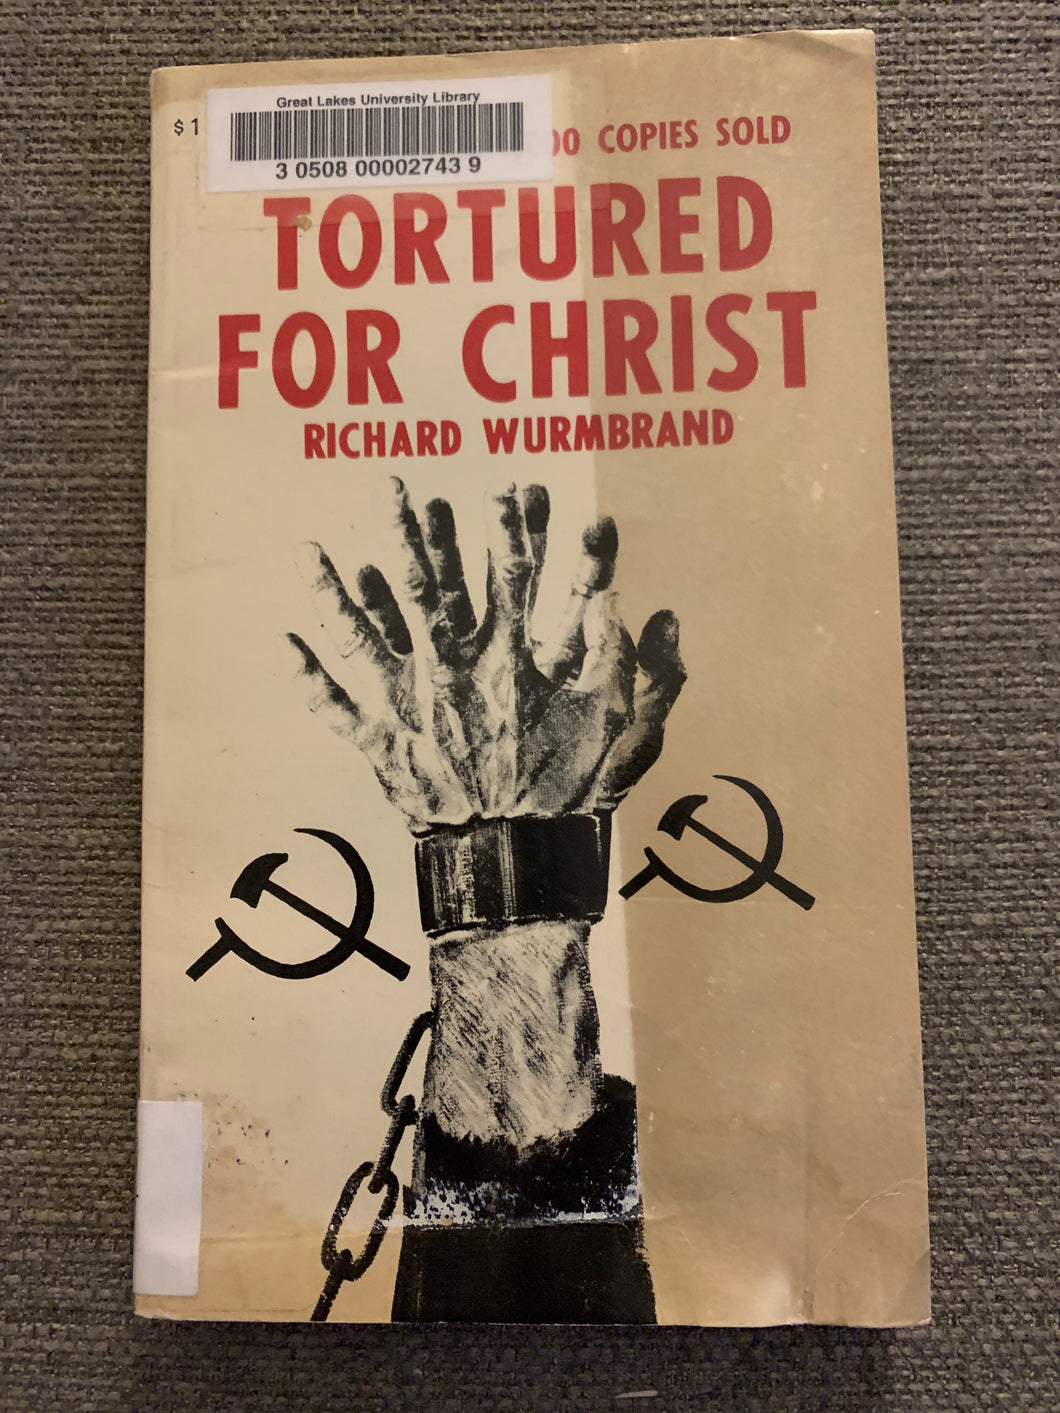 Torturned for Christ by Richard Wurmbrand